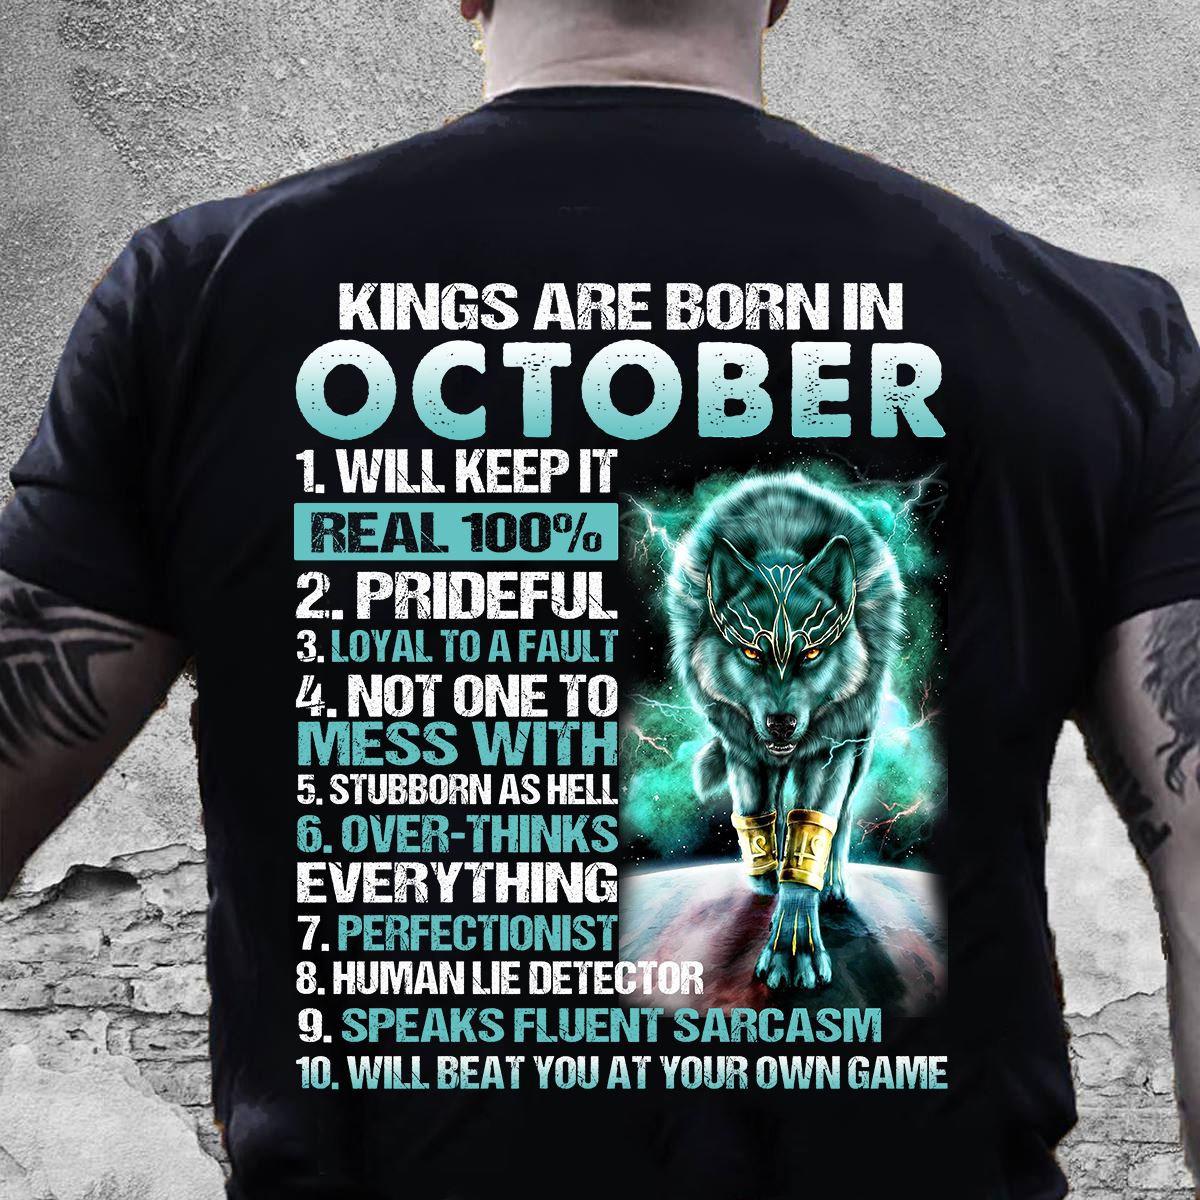 King Of Wolves, King's October Birthday – Kings are born in octoerber, will keep it real 100%, prideful, loyal to a fault